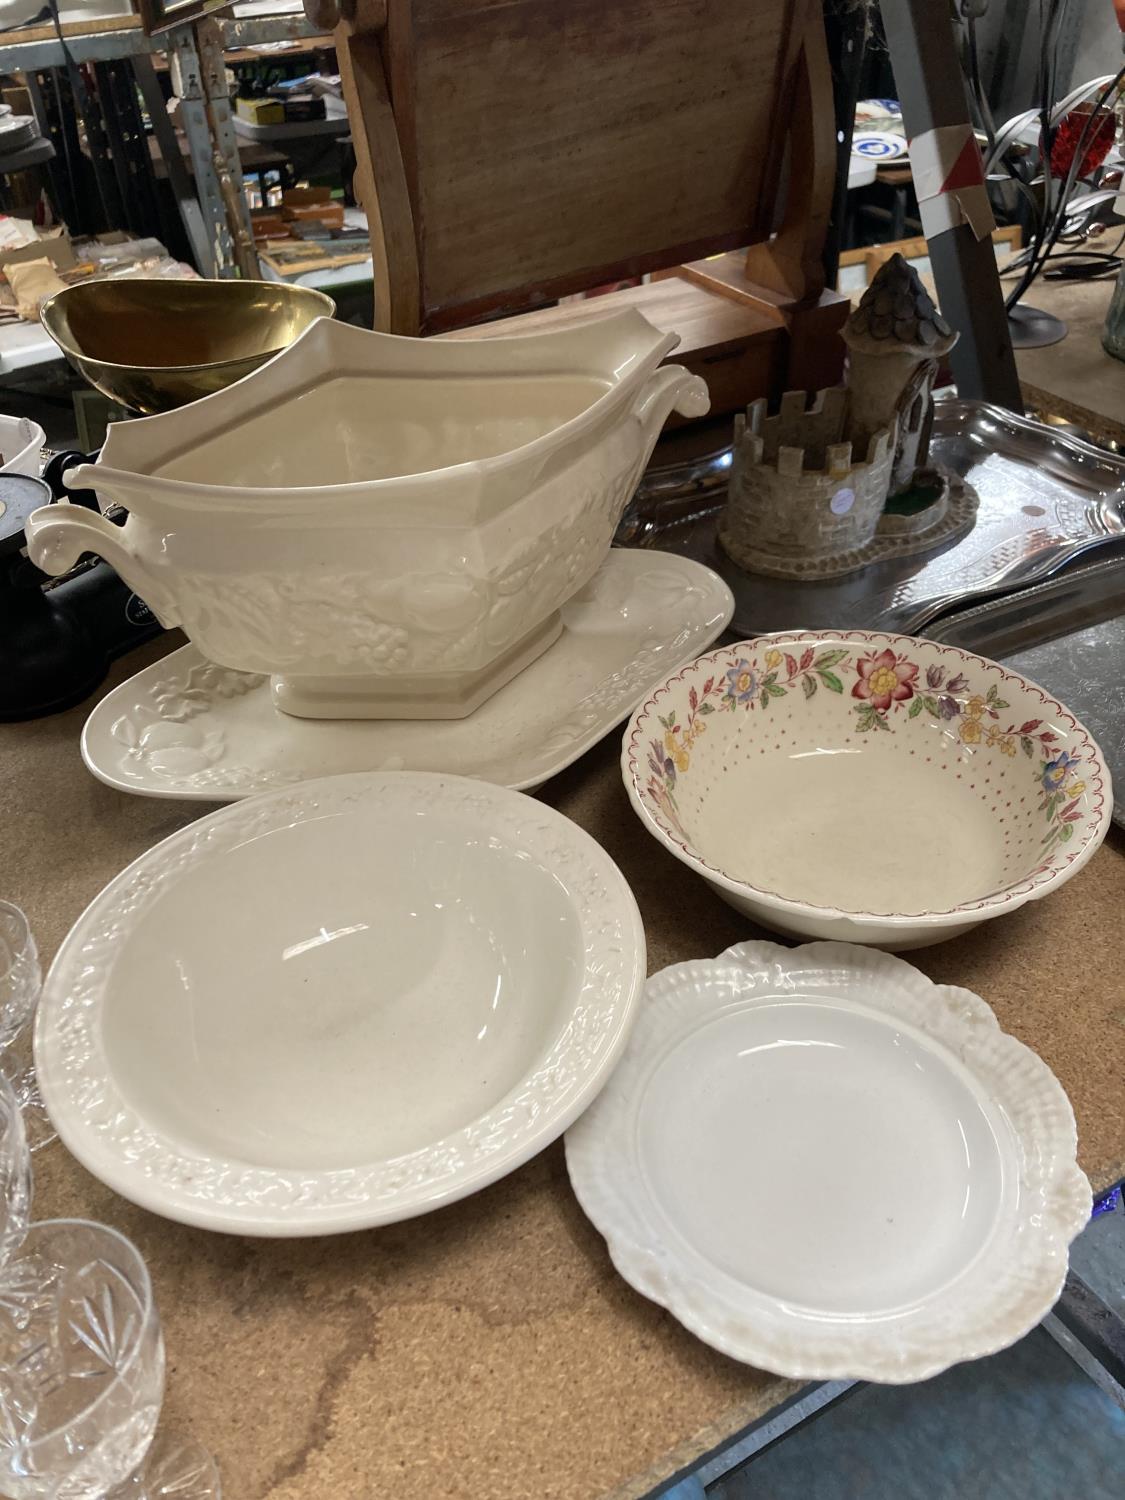 THREE LARGE PIECES OF ROYAL WORCESTER TO INCLUDE A SERVING DISH, SERVING PLATE, BOWL, ETC - Image 2 of 3